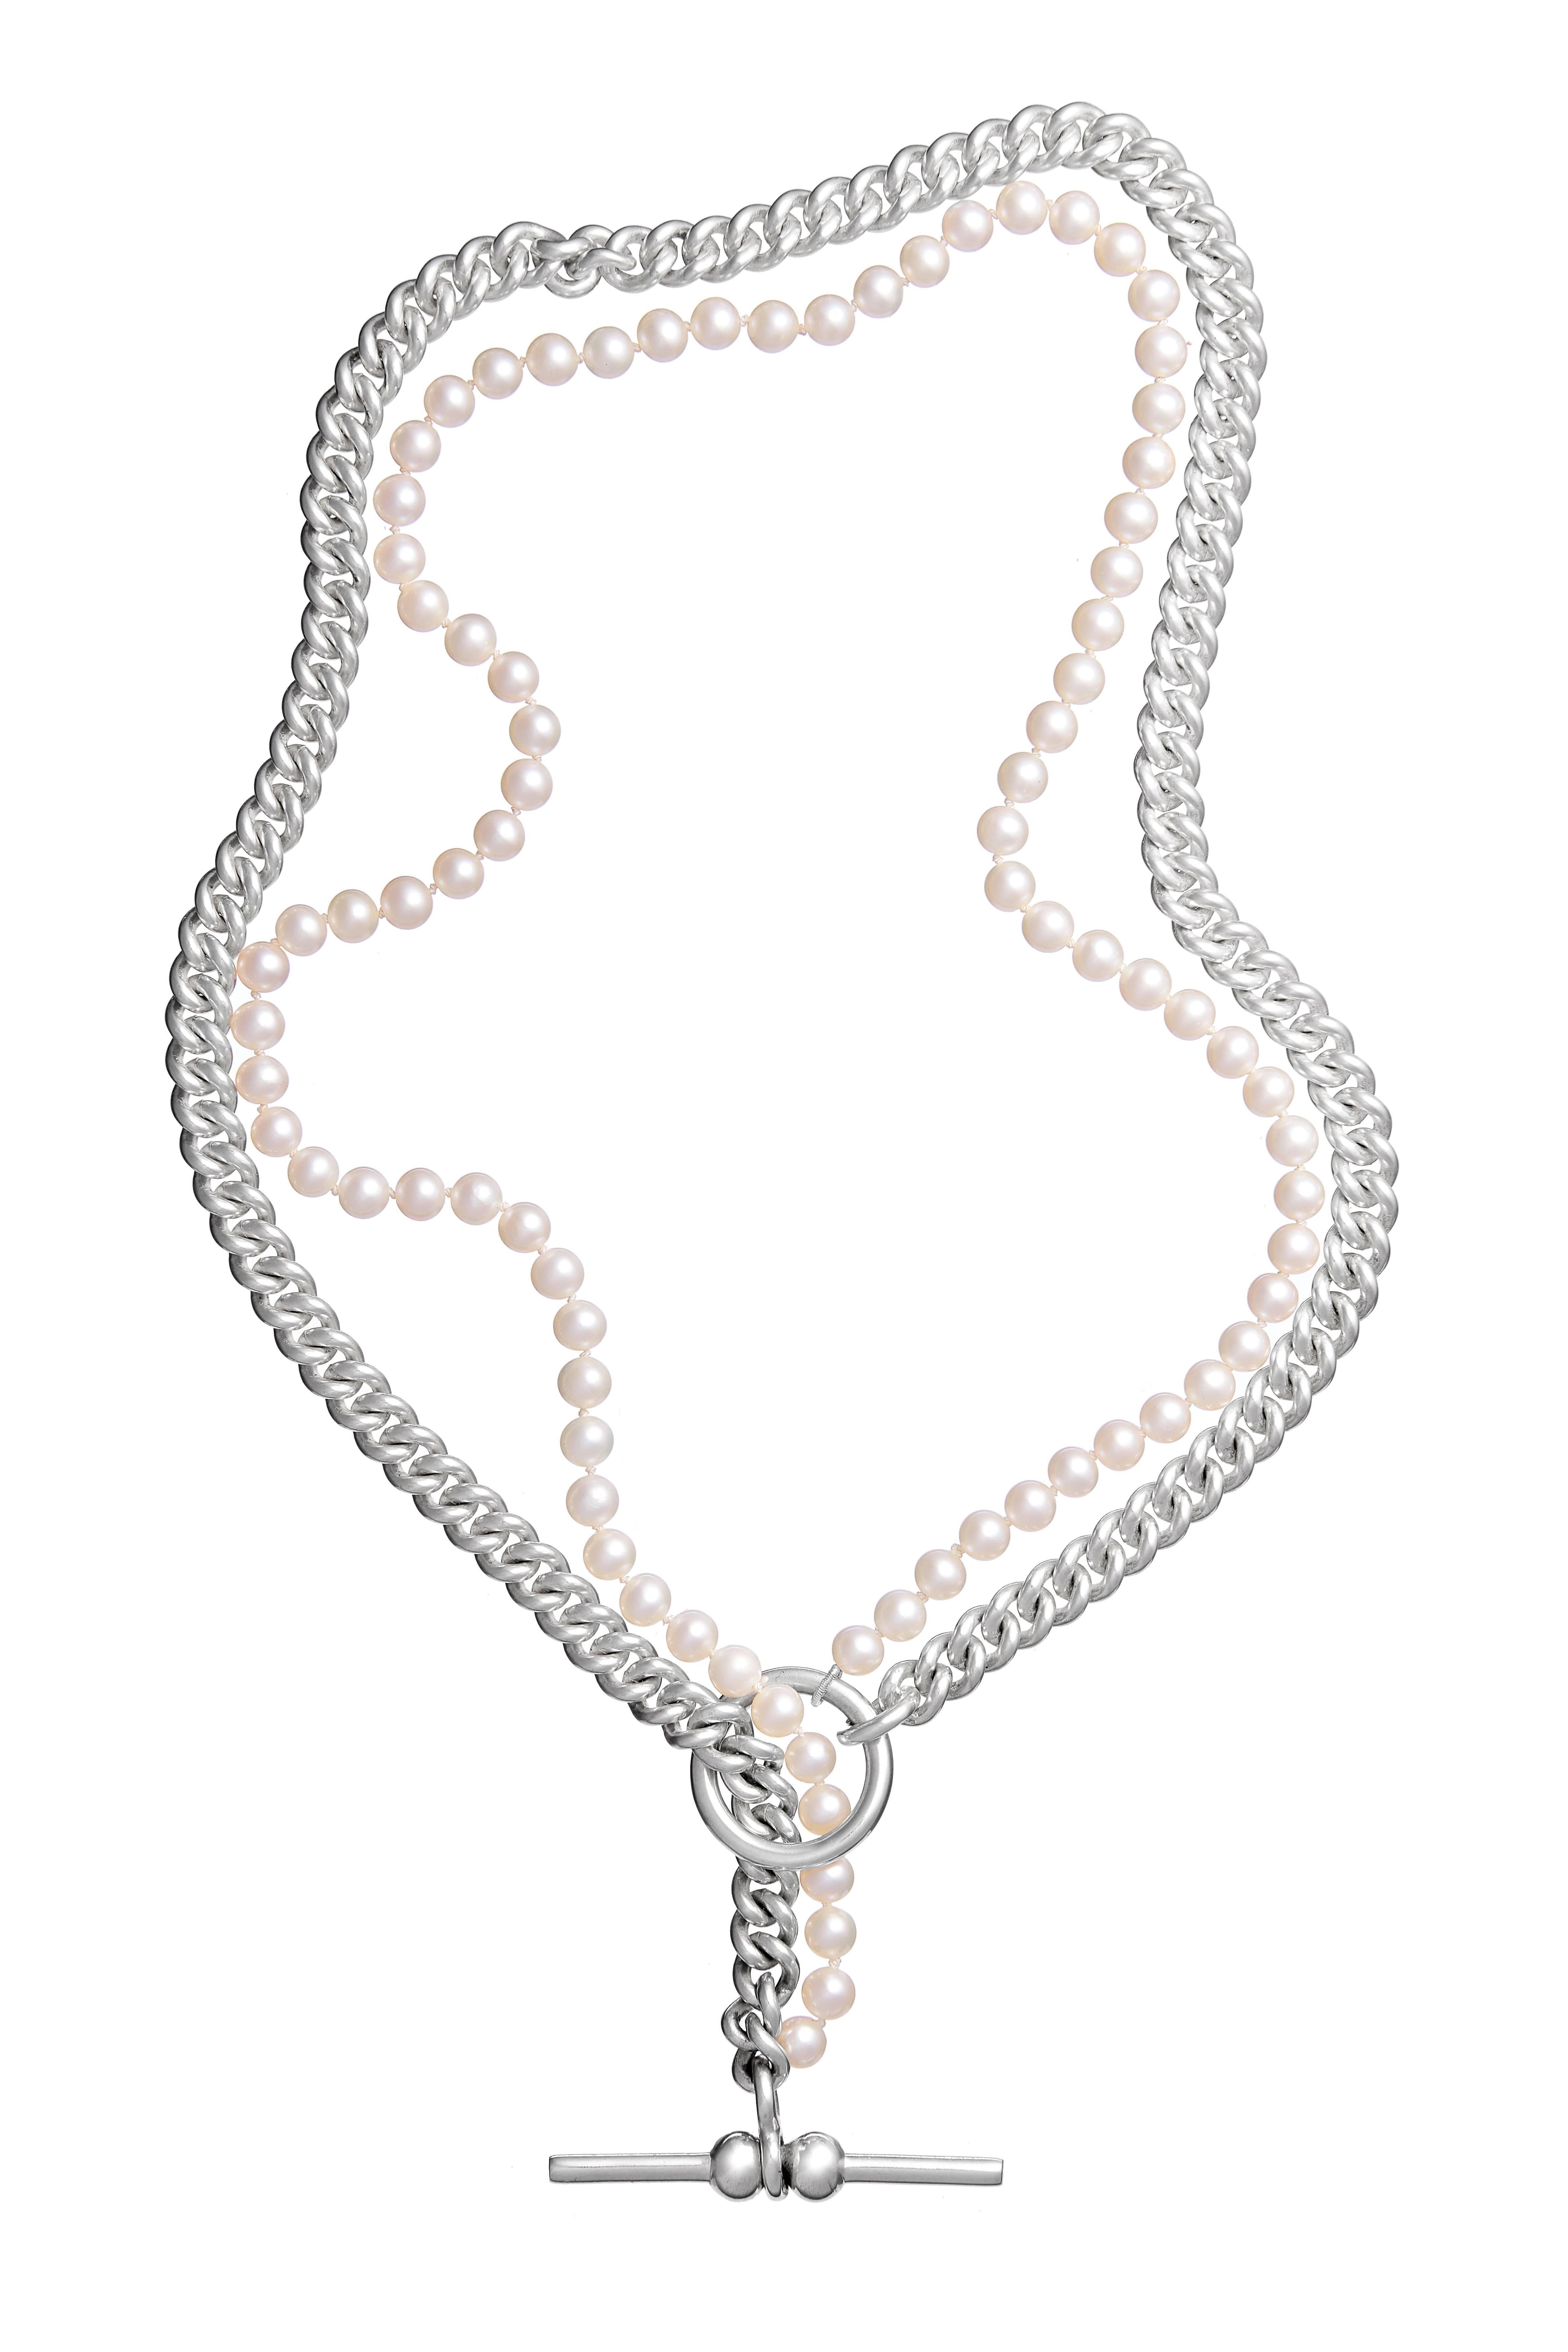 Combining 6mm silver curb chain traditionally found attached to antique pocket watches and pearls synonymous with female iconology, this statement necklace perfectly merges masculine and feminine elements into one balanced piece. 

All pieces are